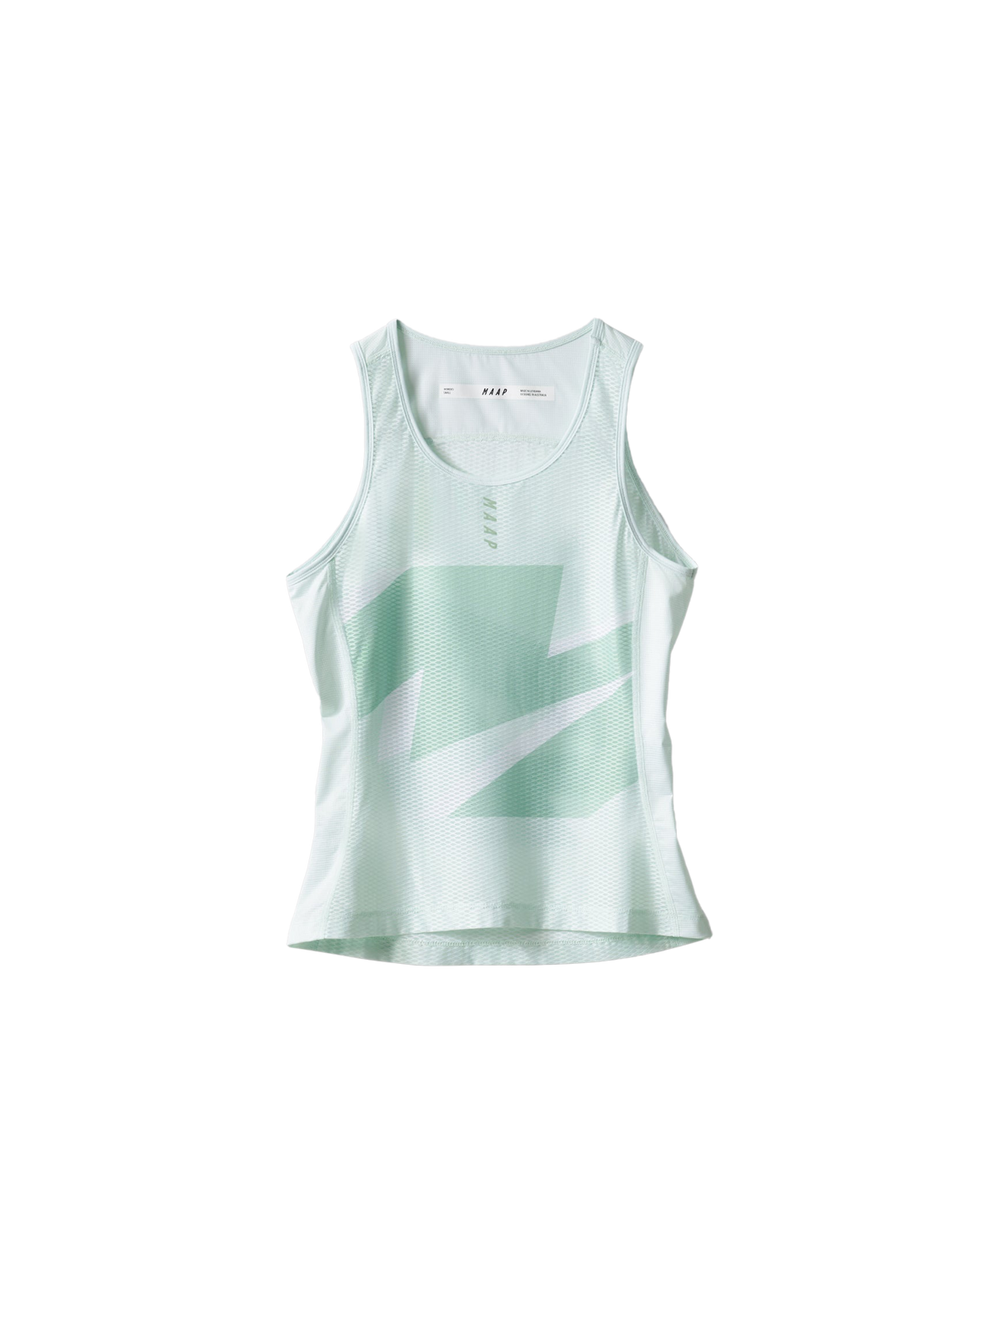 Product Image for Women's Evolve 3D Team Base Layer